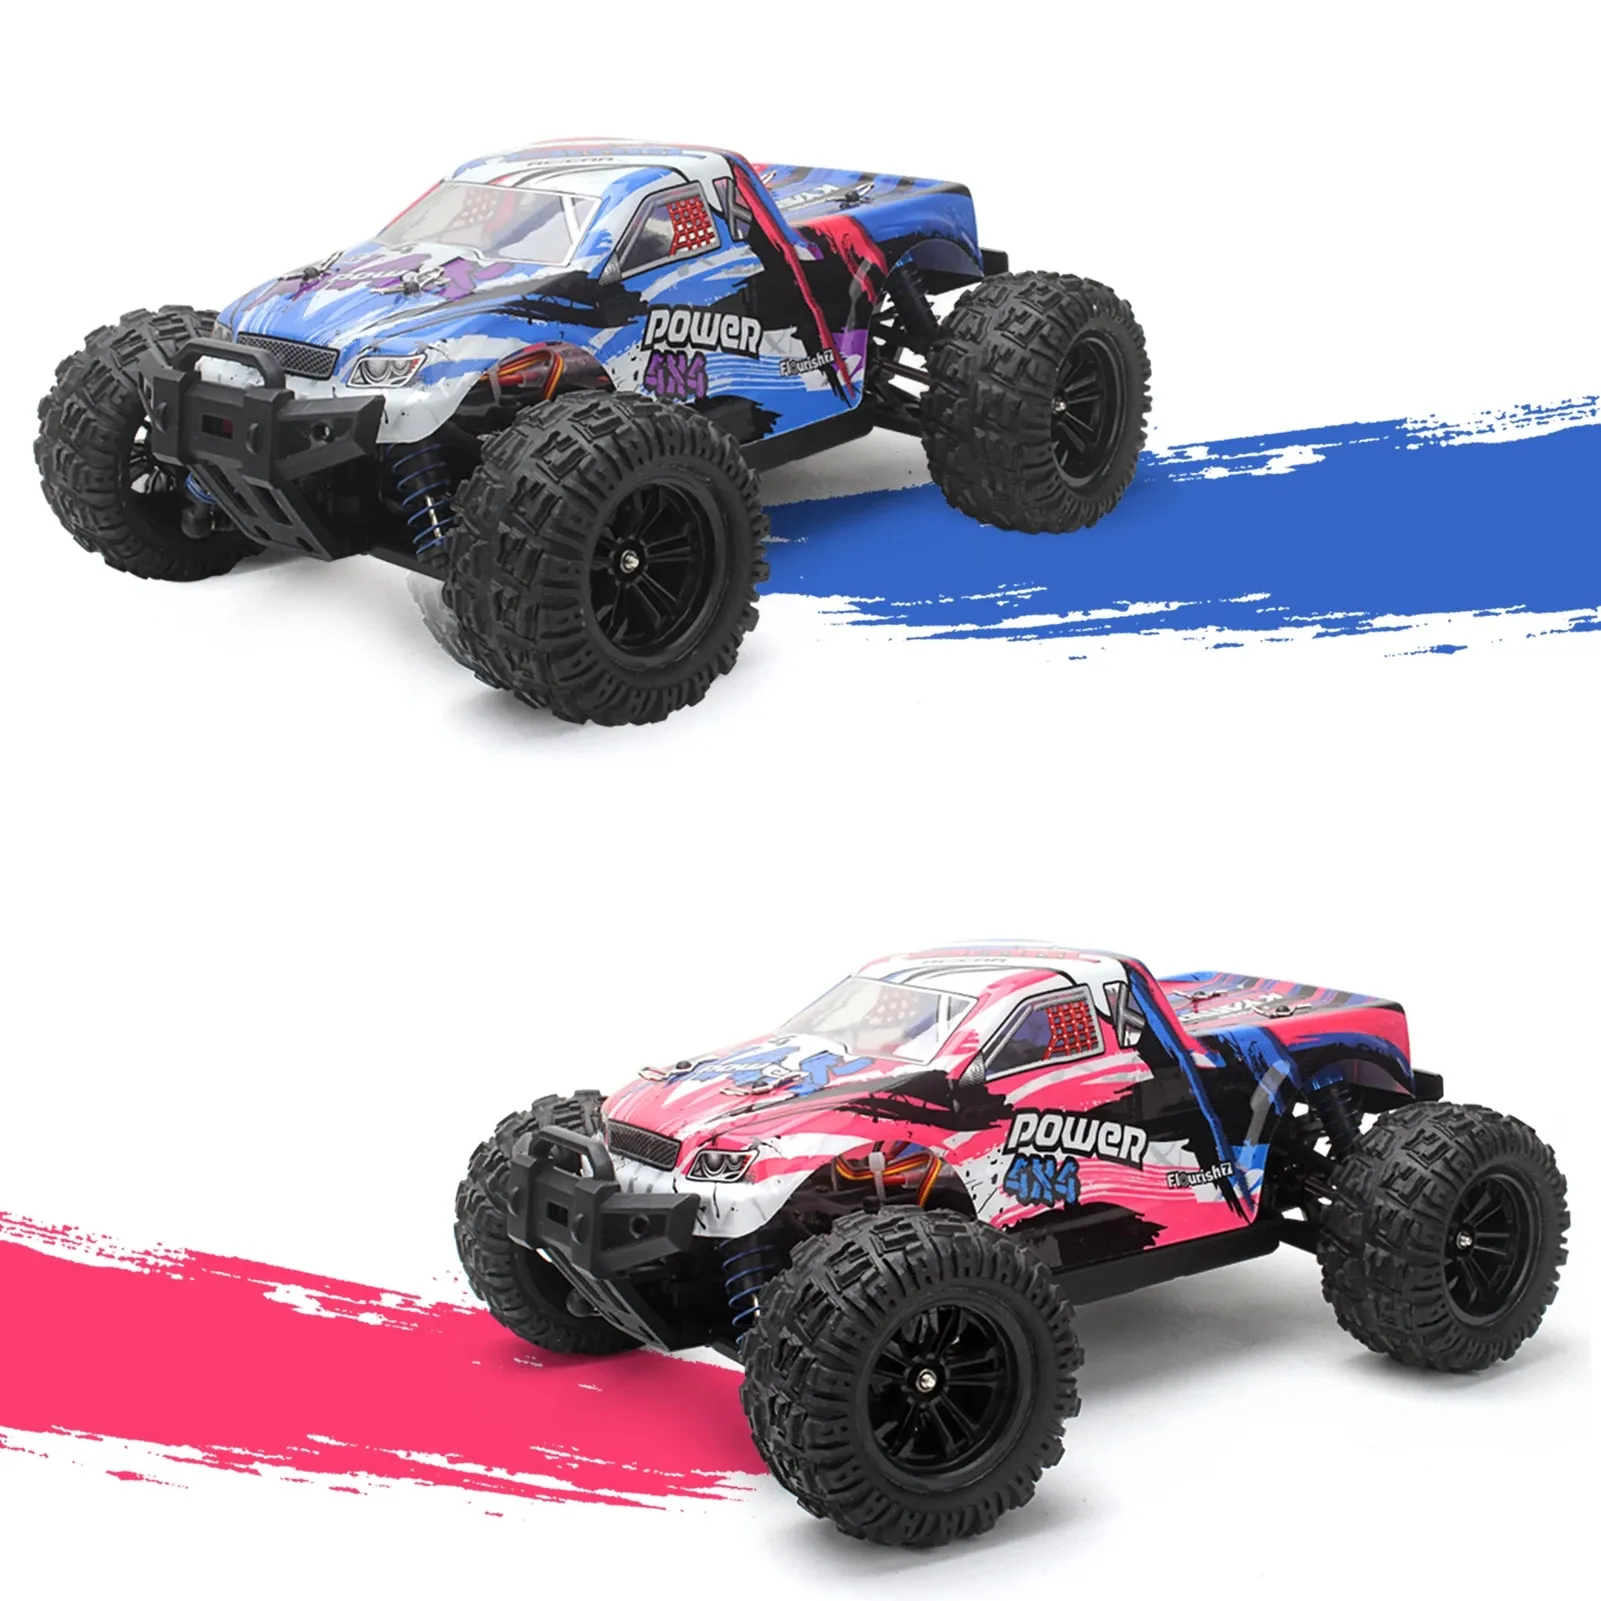 KYAMRC KY-2819A 1:18 RC Car All Terrain 2.4GHz 4WD Off-Road Remote Control Crawler Truck 35KM/H High Speed Racing Vehicle Gift